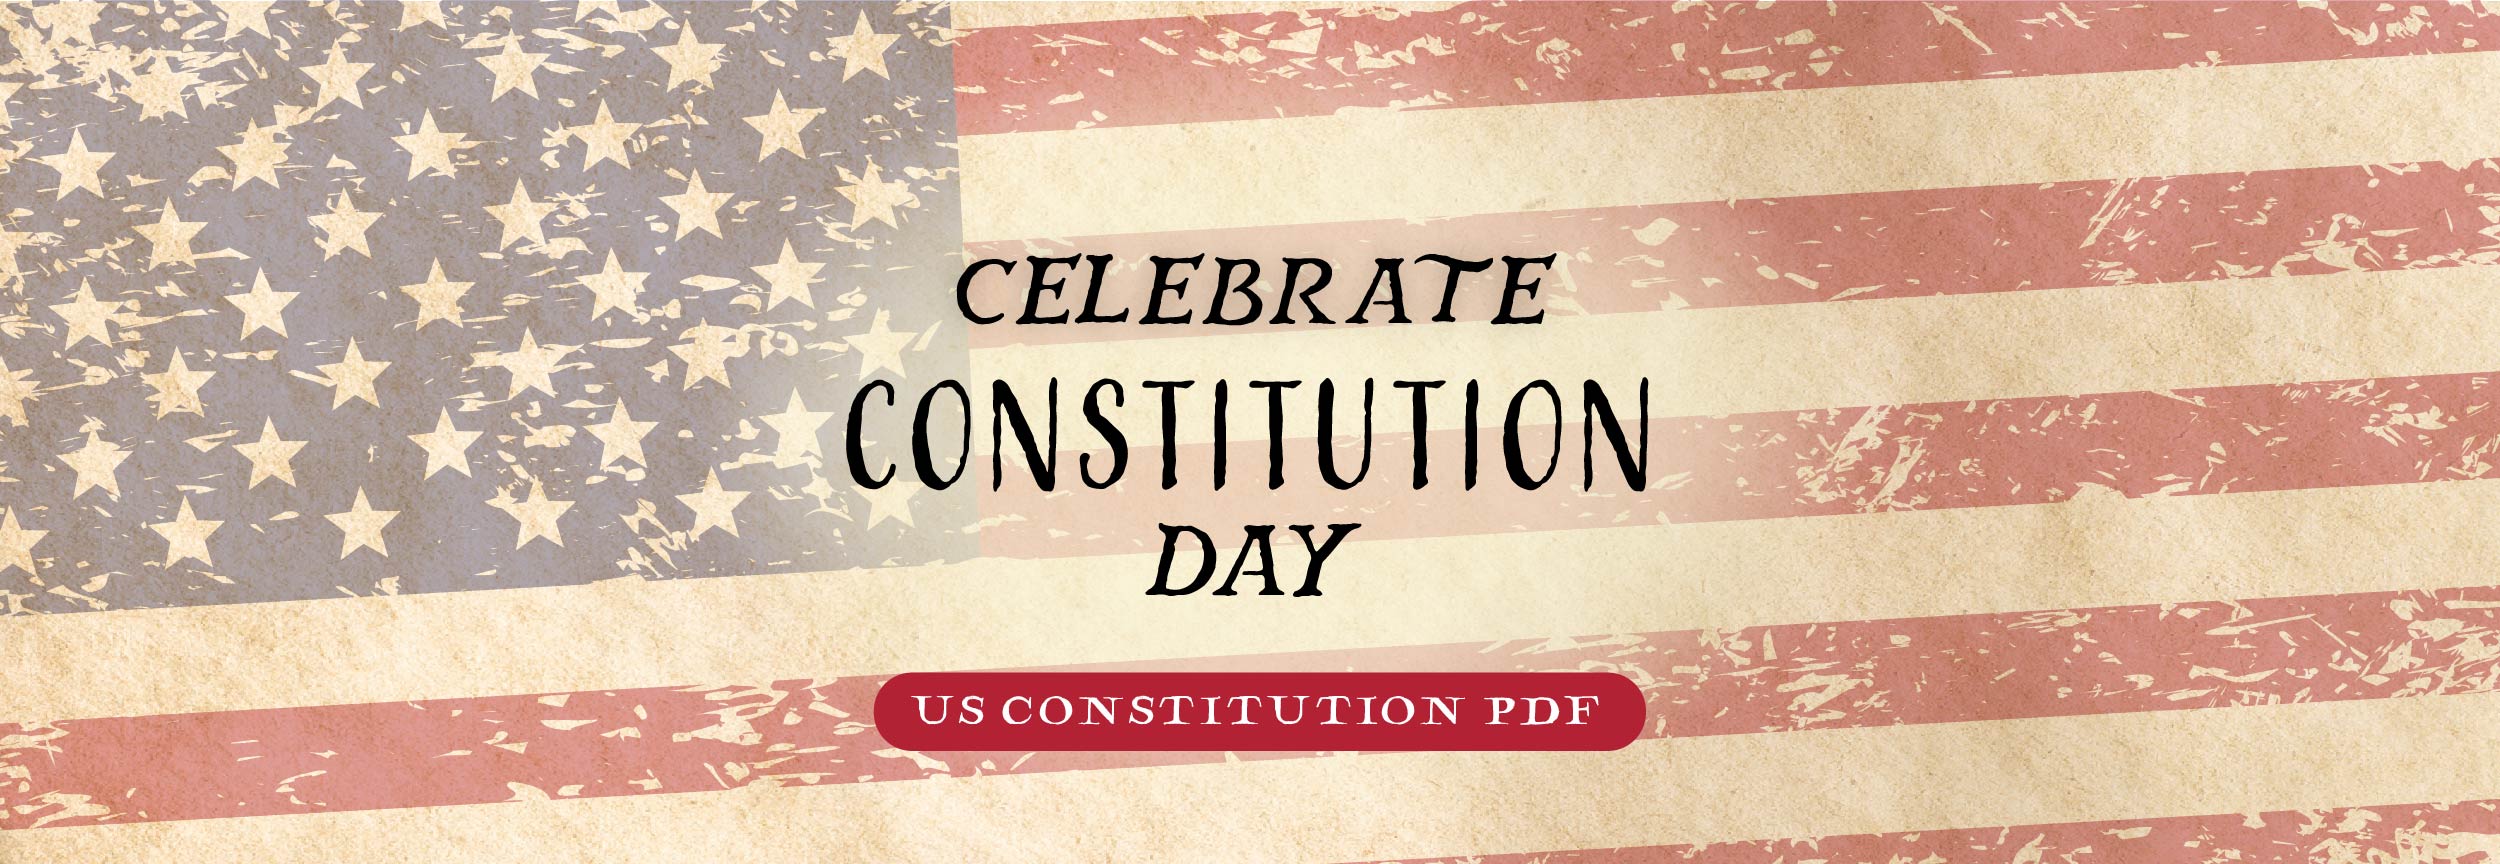 Celebrate Constitution Day The Good and the Beautiful